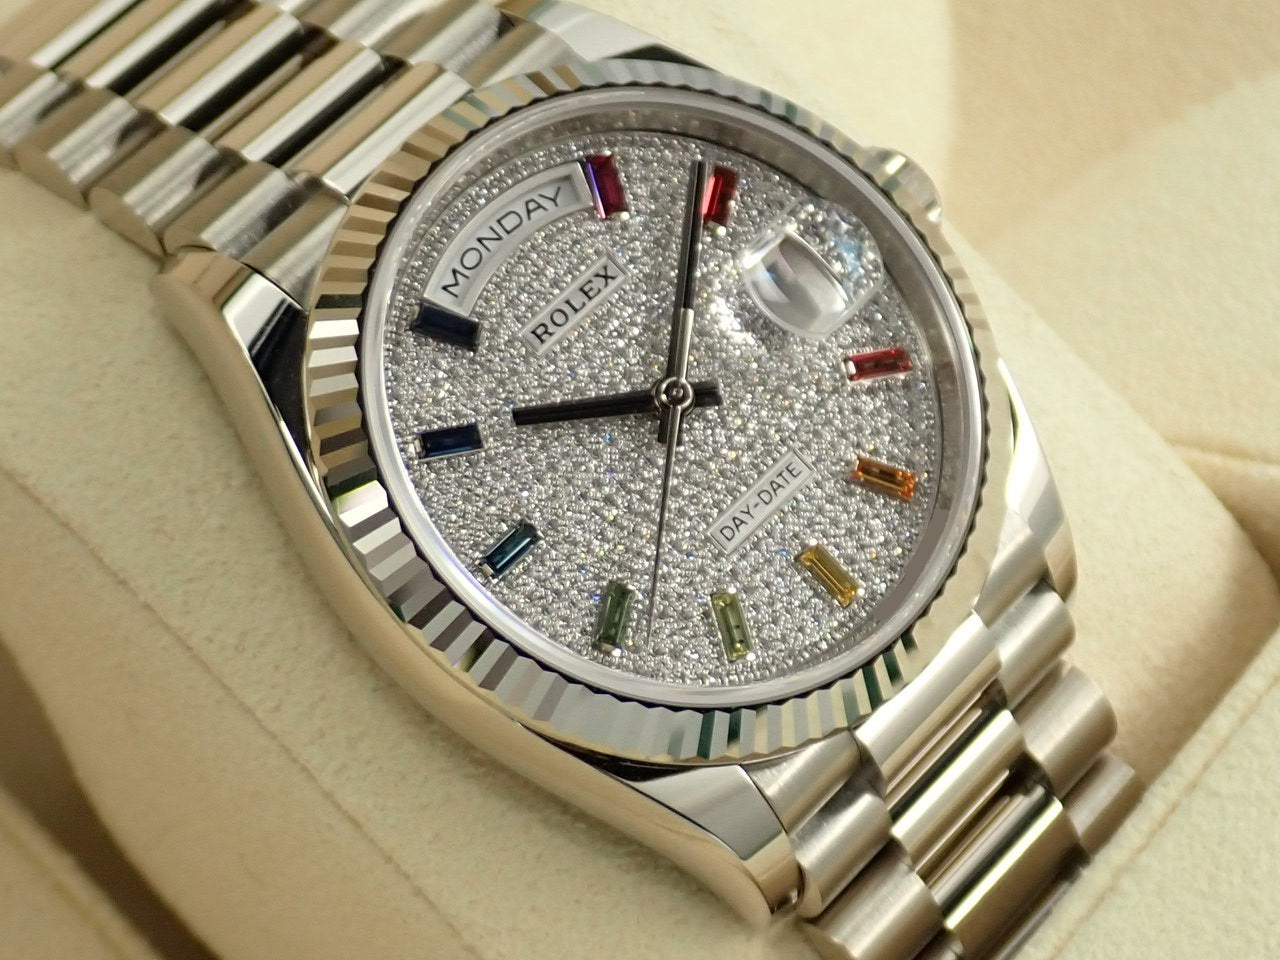 Rolex Day-Date 36 Pavé Diamond Rainbow Sapphire Dial &lt;Warranty Box and Others&gt;